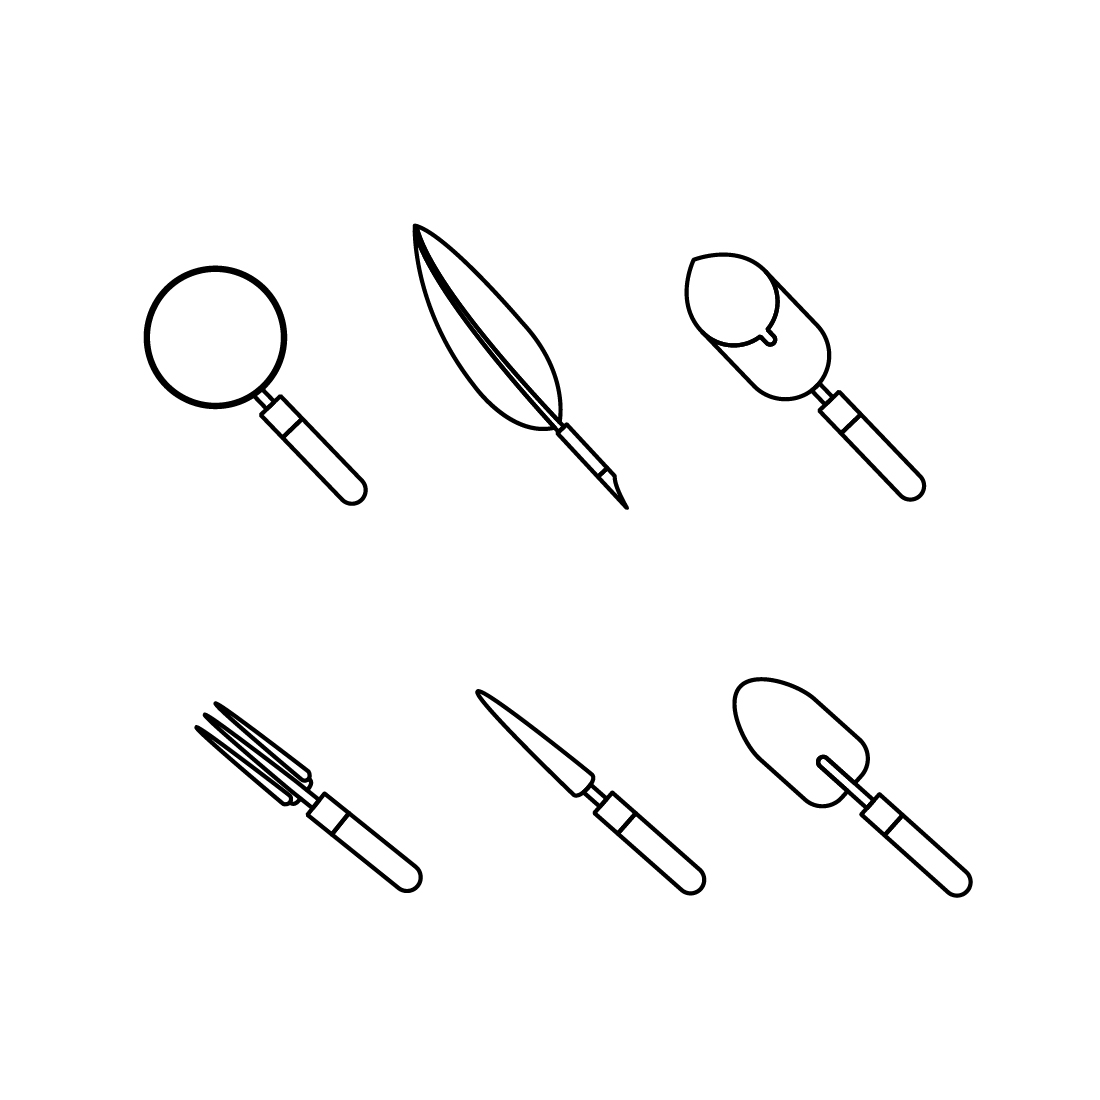 Line drawing of different types of kitchen utensils.